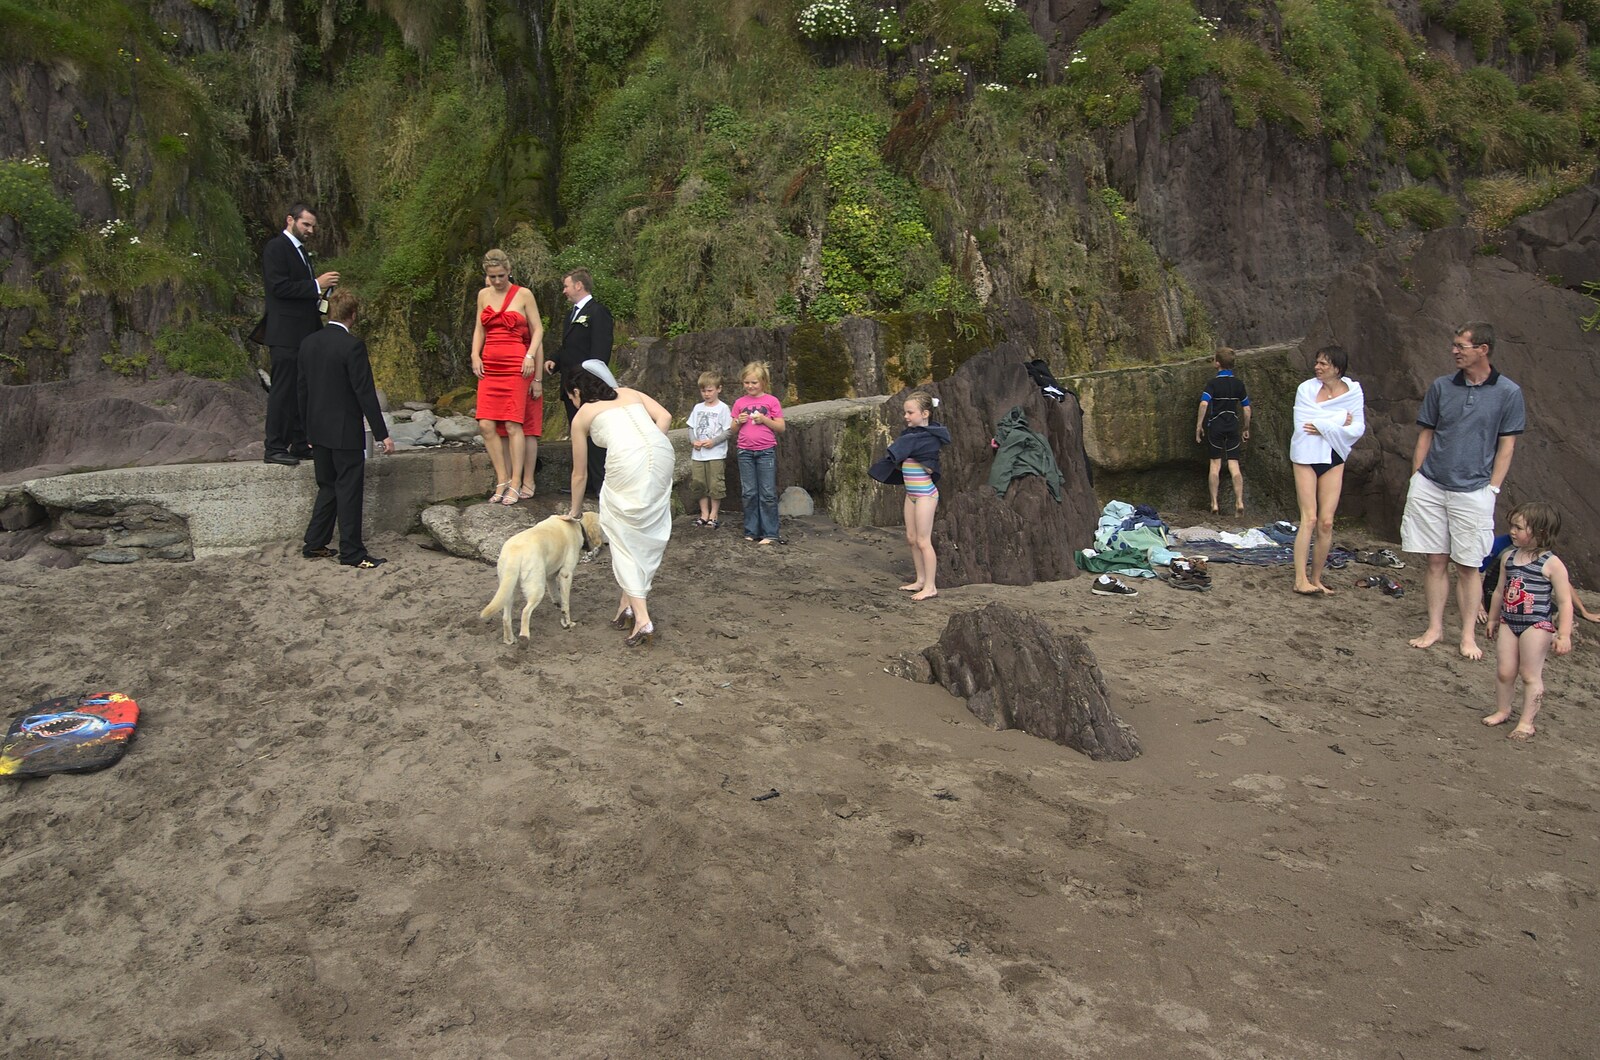 Some of the other beachgoers are bemused by it all from Julie and Cameron's Wedding, Ballintaggart House, Dingle - 24th July 2009